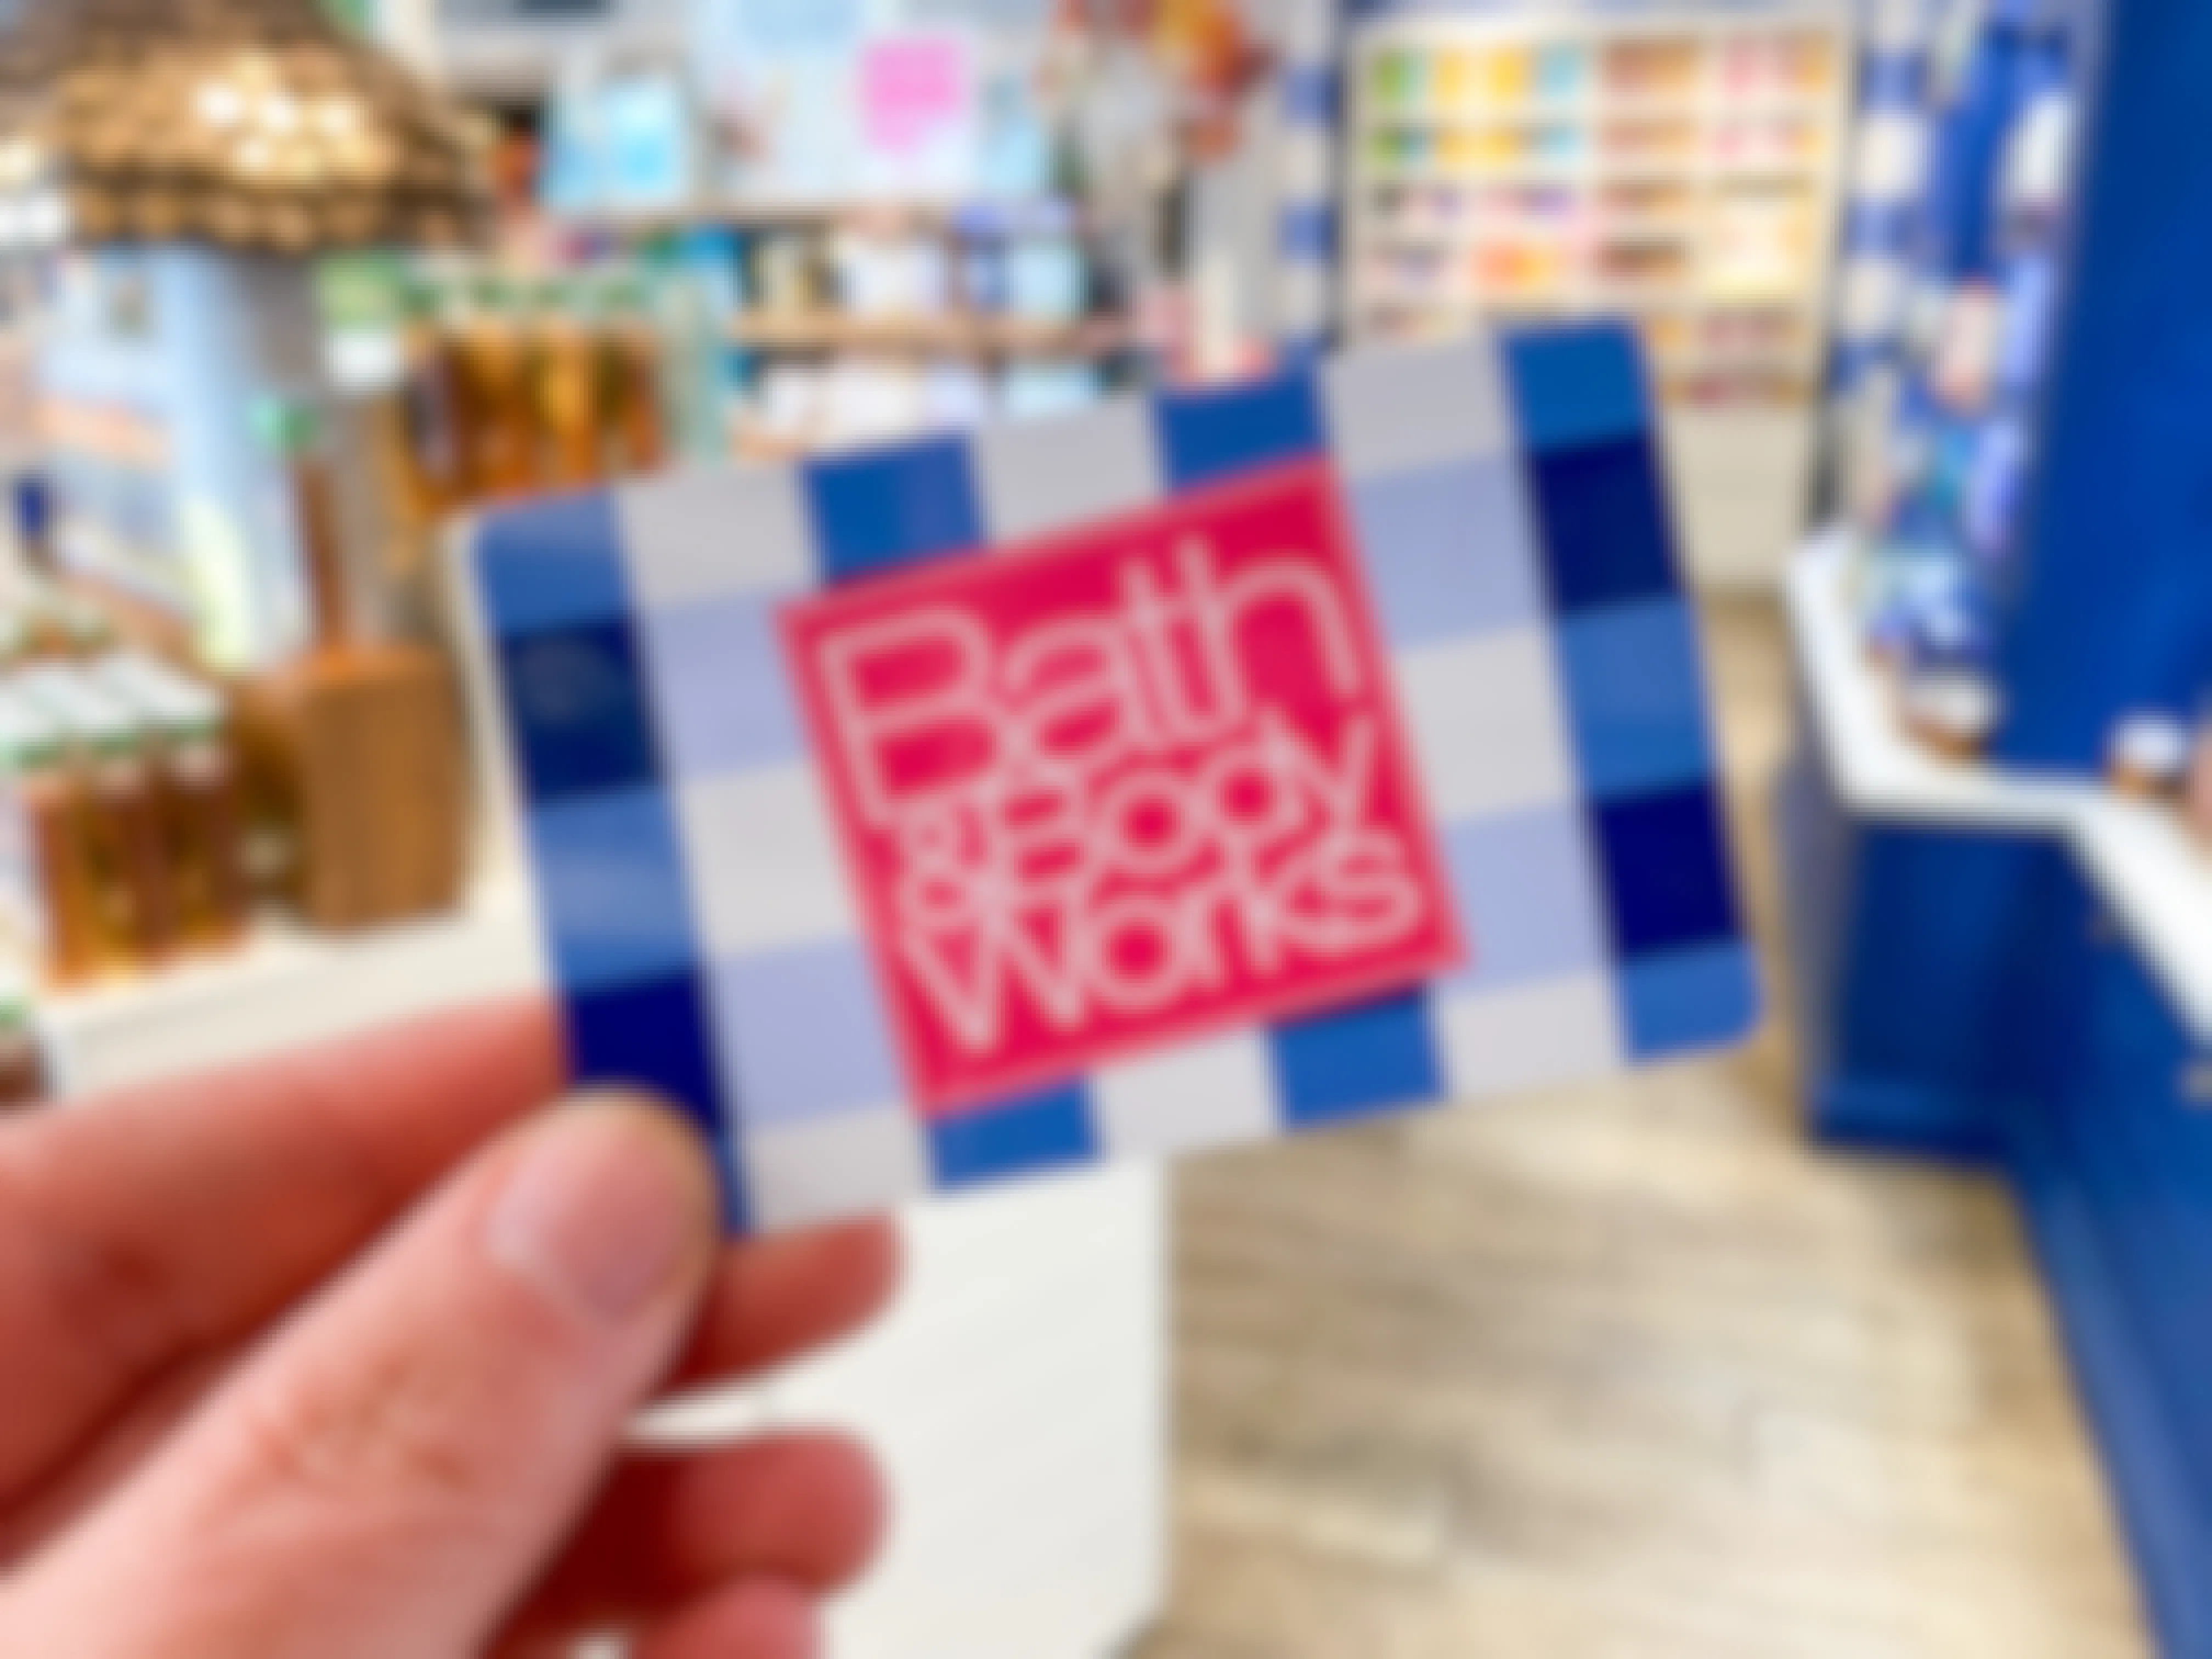 A person's hand holding up a Bath & Body Works gift card inside of a Bath & Body Works.